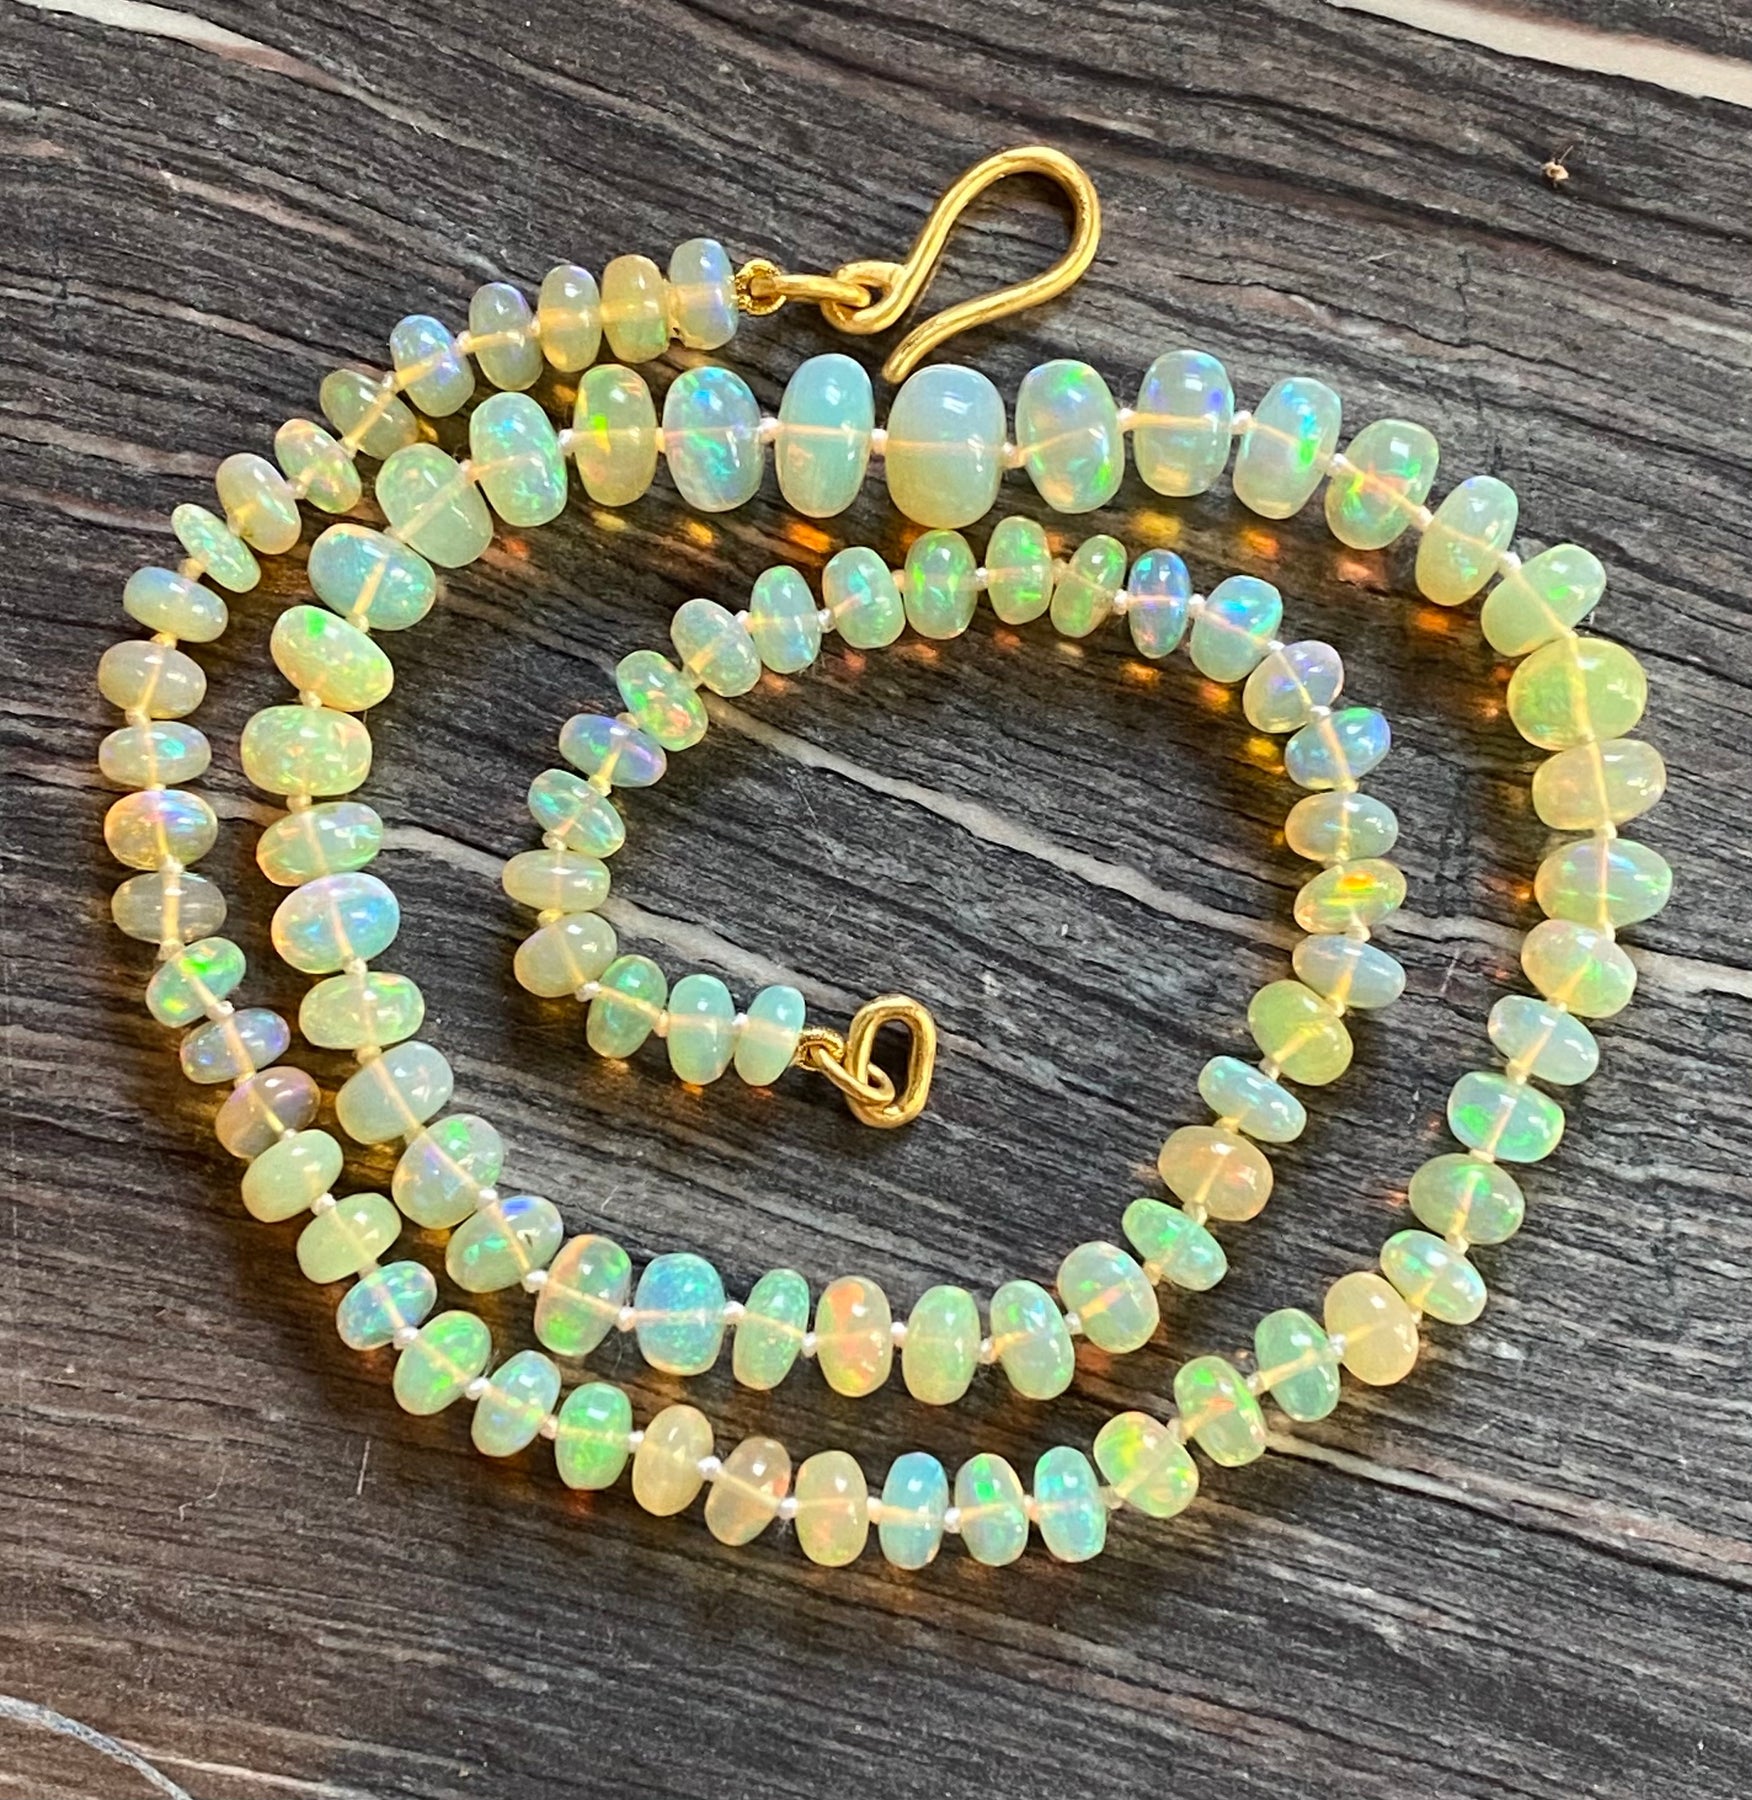 18 Yellow Gold Ethiopian Opal Beaded Necklace Strand - Dianna Rae Jewelry